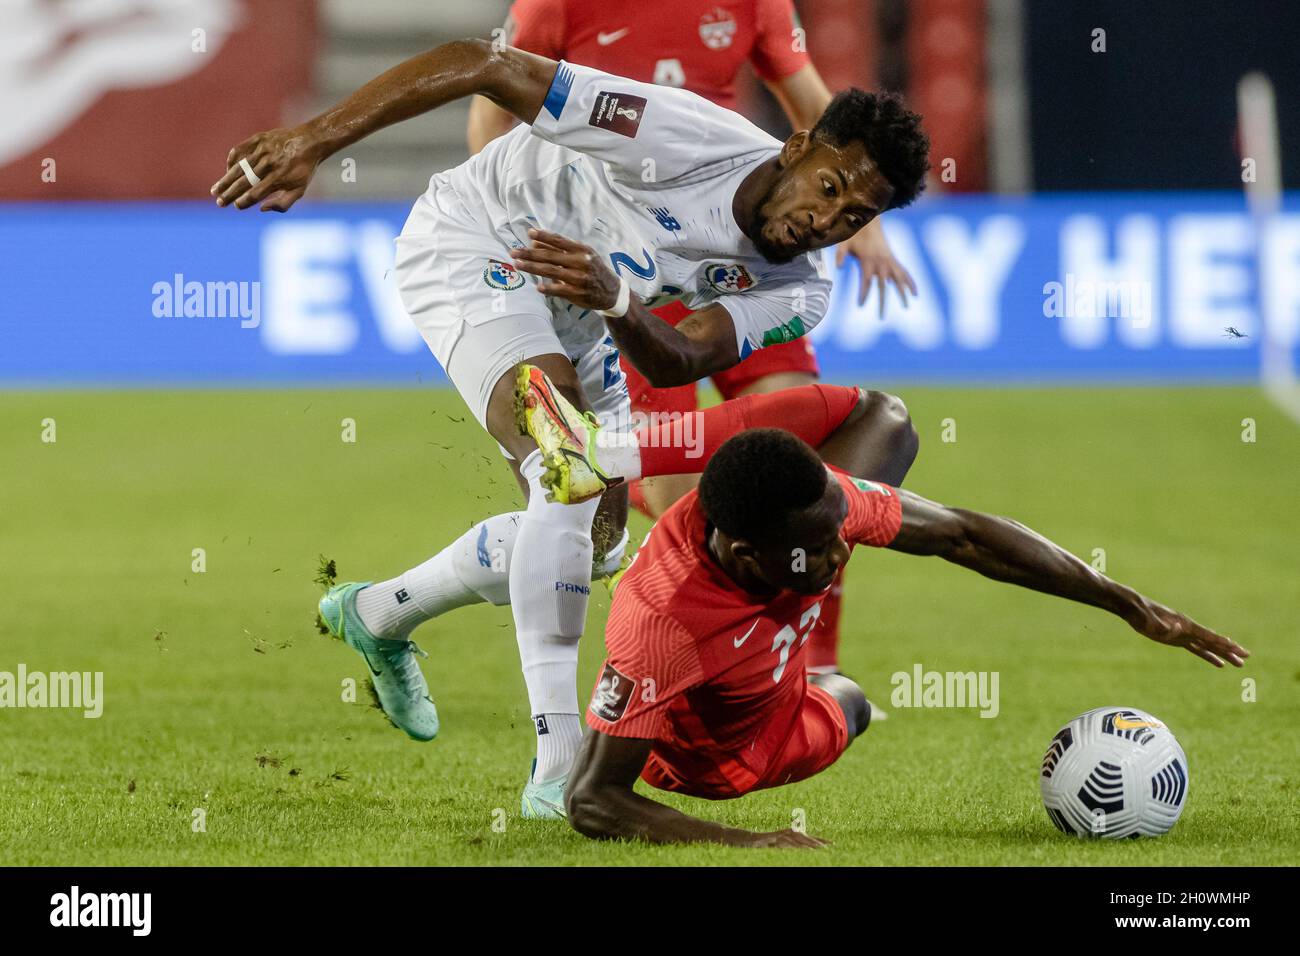 Toronto, Canada, October 13, 2021: Michael Amir Murillo (white) of Team Panama tackles Richie Laryea (red) of Team Canada for the ball during the CONCACAF FIFA World Cup Qualifying 2022 match at BMO Field in Toronto, Canada. Canada won the match 4-1. Credit: Phamai Techaphan/Alamy Live News Stock Photo